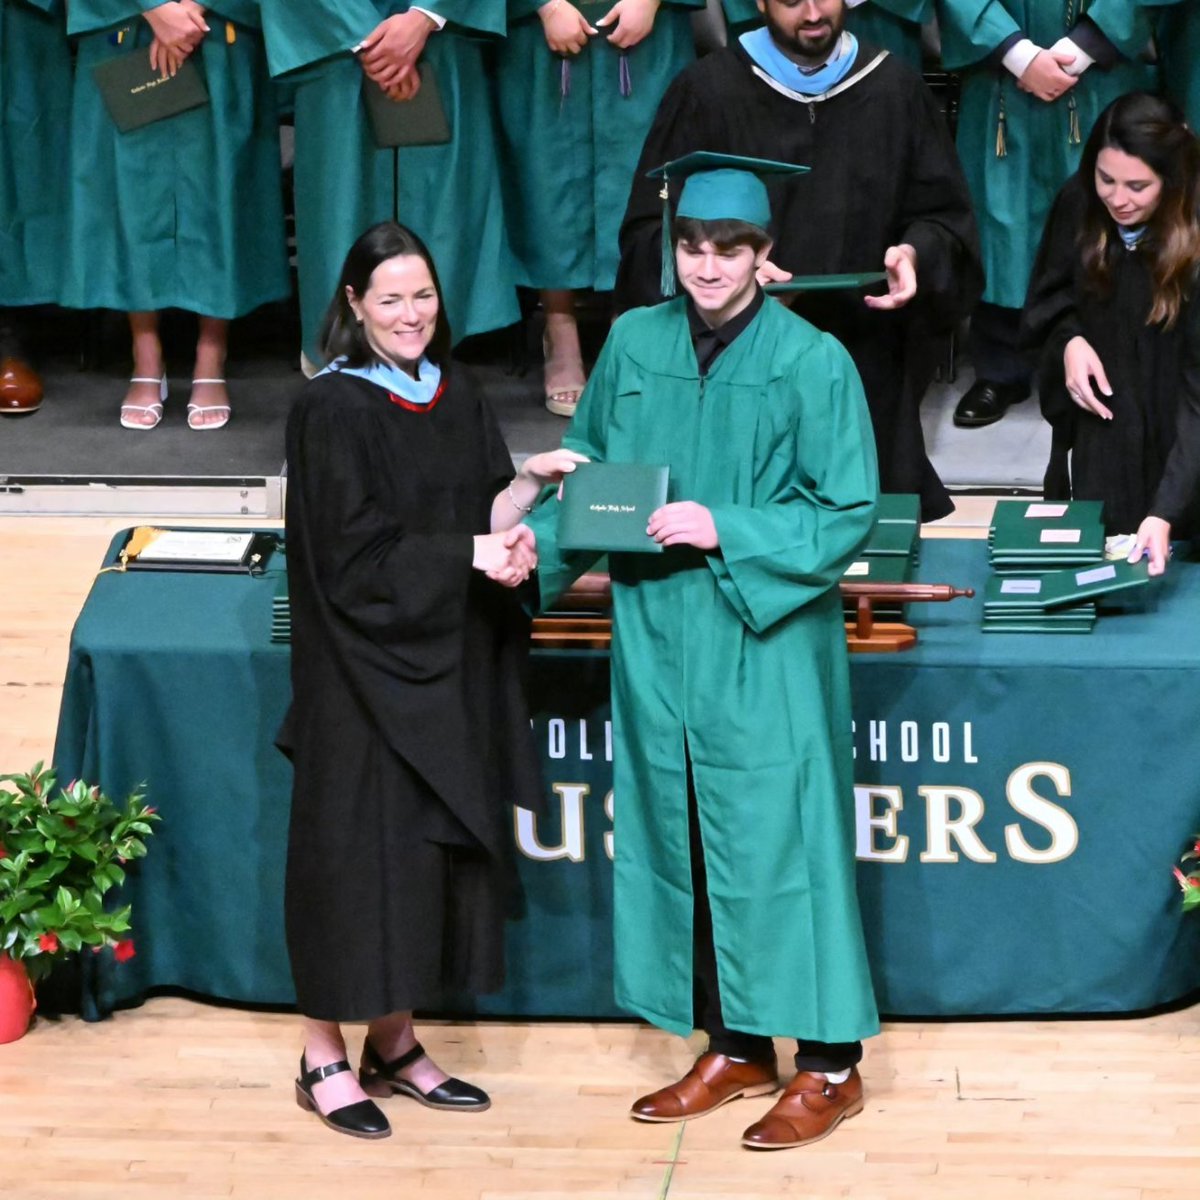 What an incredible journey it's been for Aidan at Catholic High School! Such a wide range of emotions on graduation day, so proud of you and your accomplishments! Your journey, impact, and grin is now moving on to Notre Dame College, where I have no doubt you will shine.